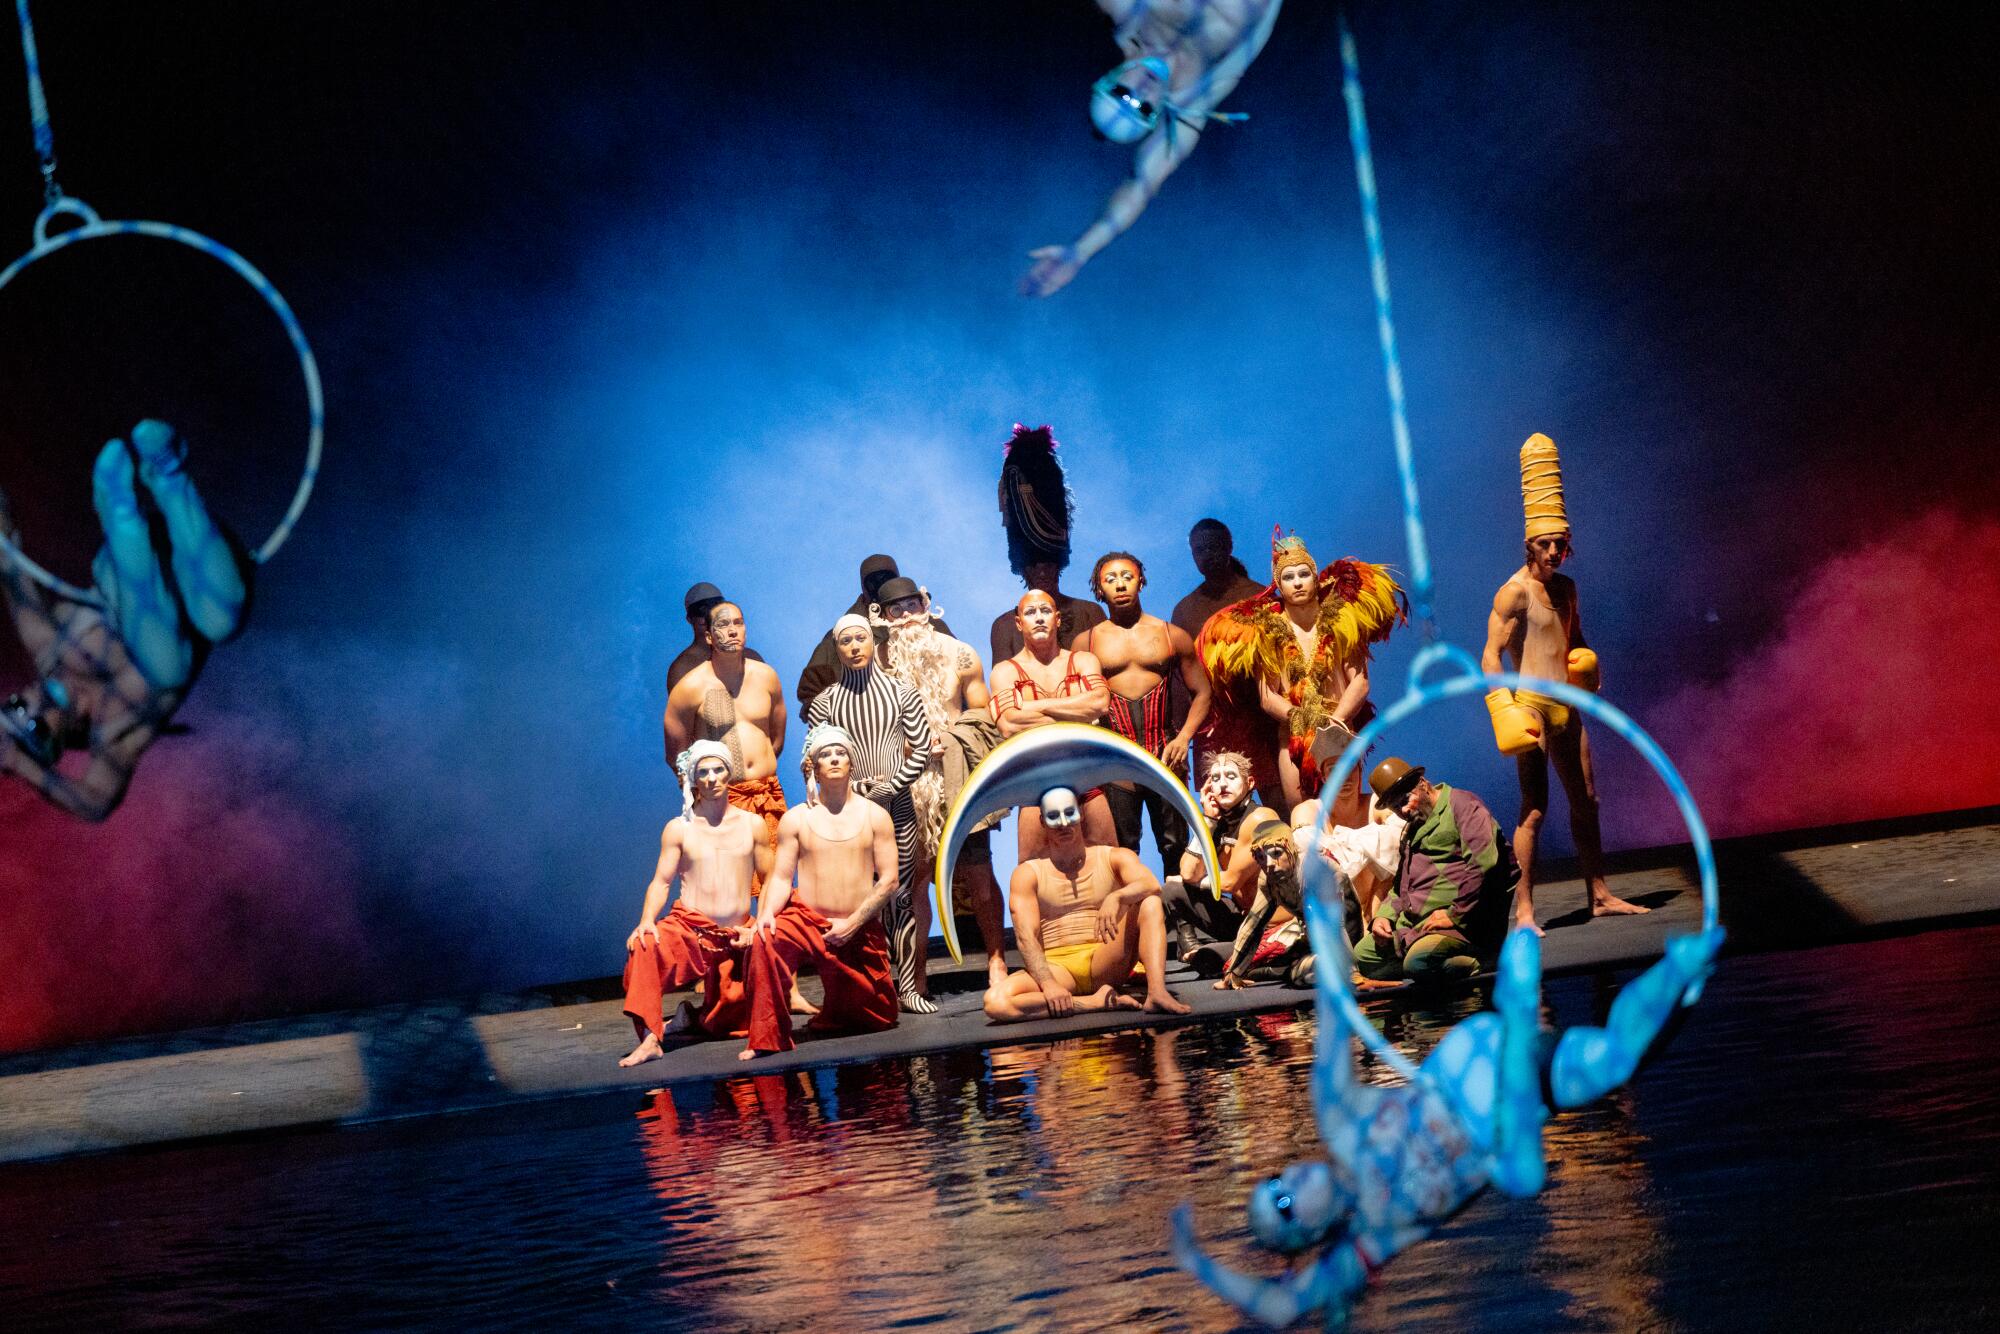 Cast members perform onstage during Cirque du Soleil's "O" at the Bellagio.